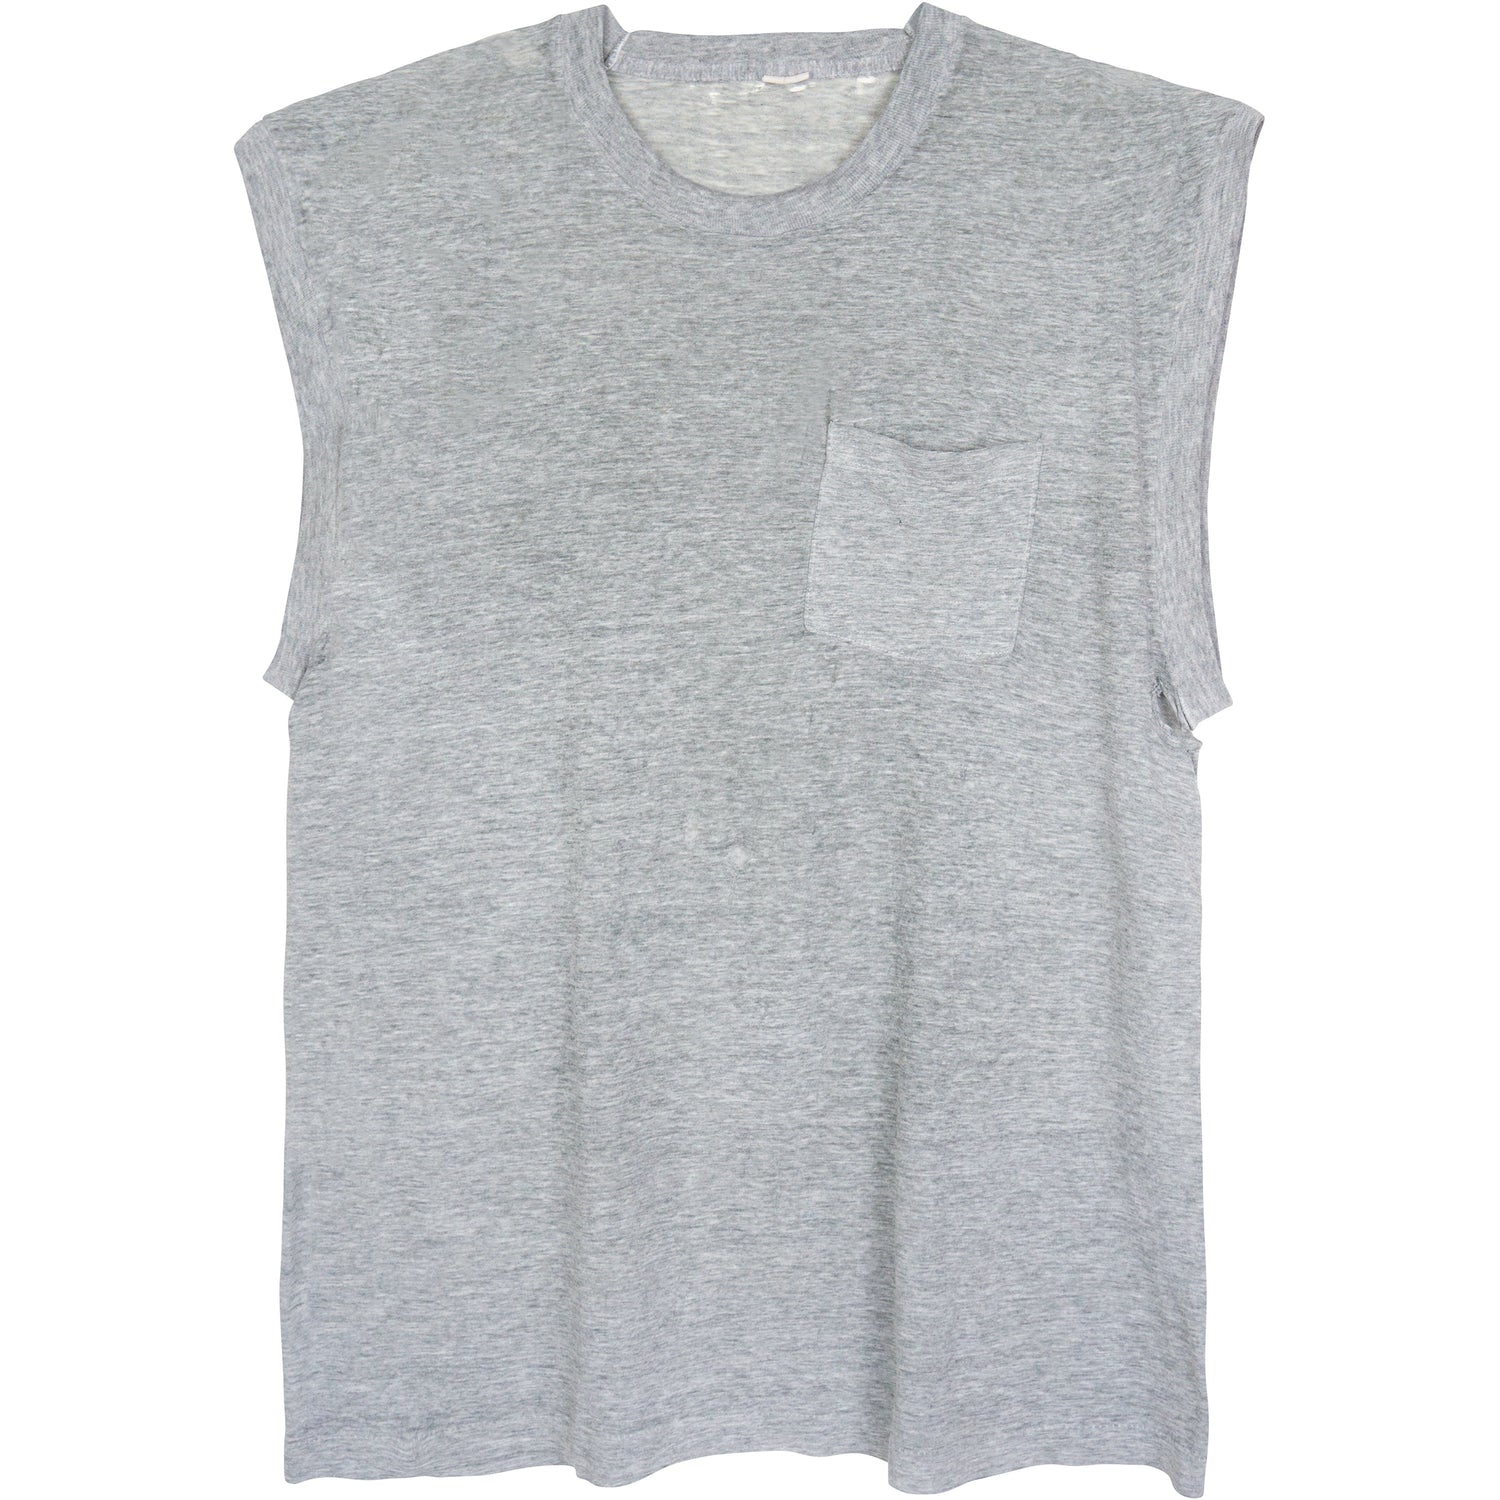 VINTAGE HEATHER GREY MUSCLE T-SHIRT